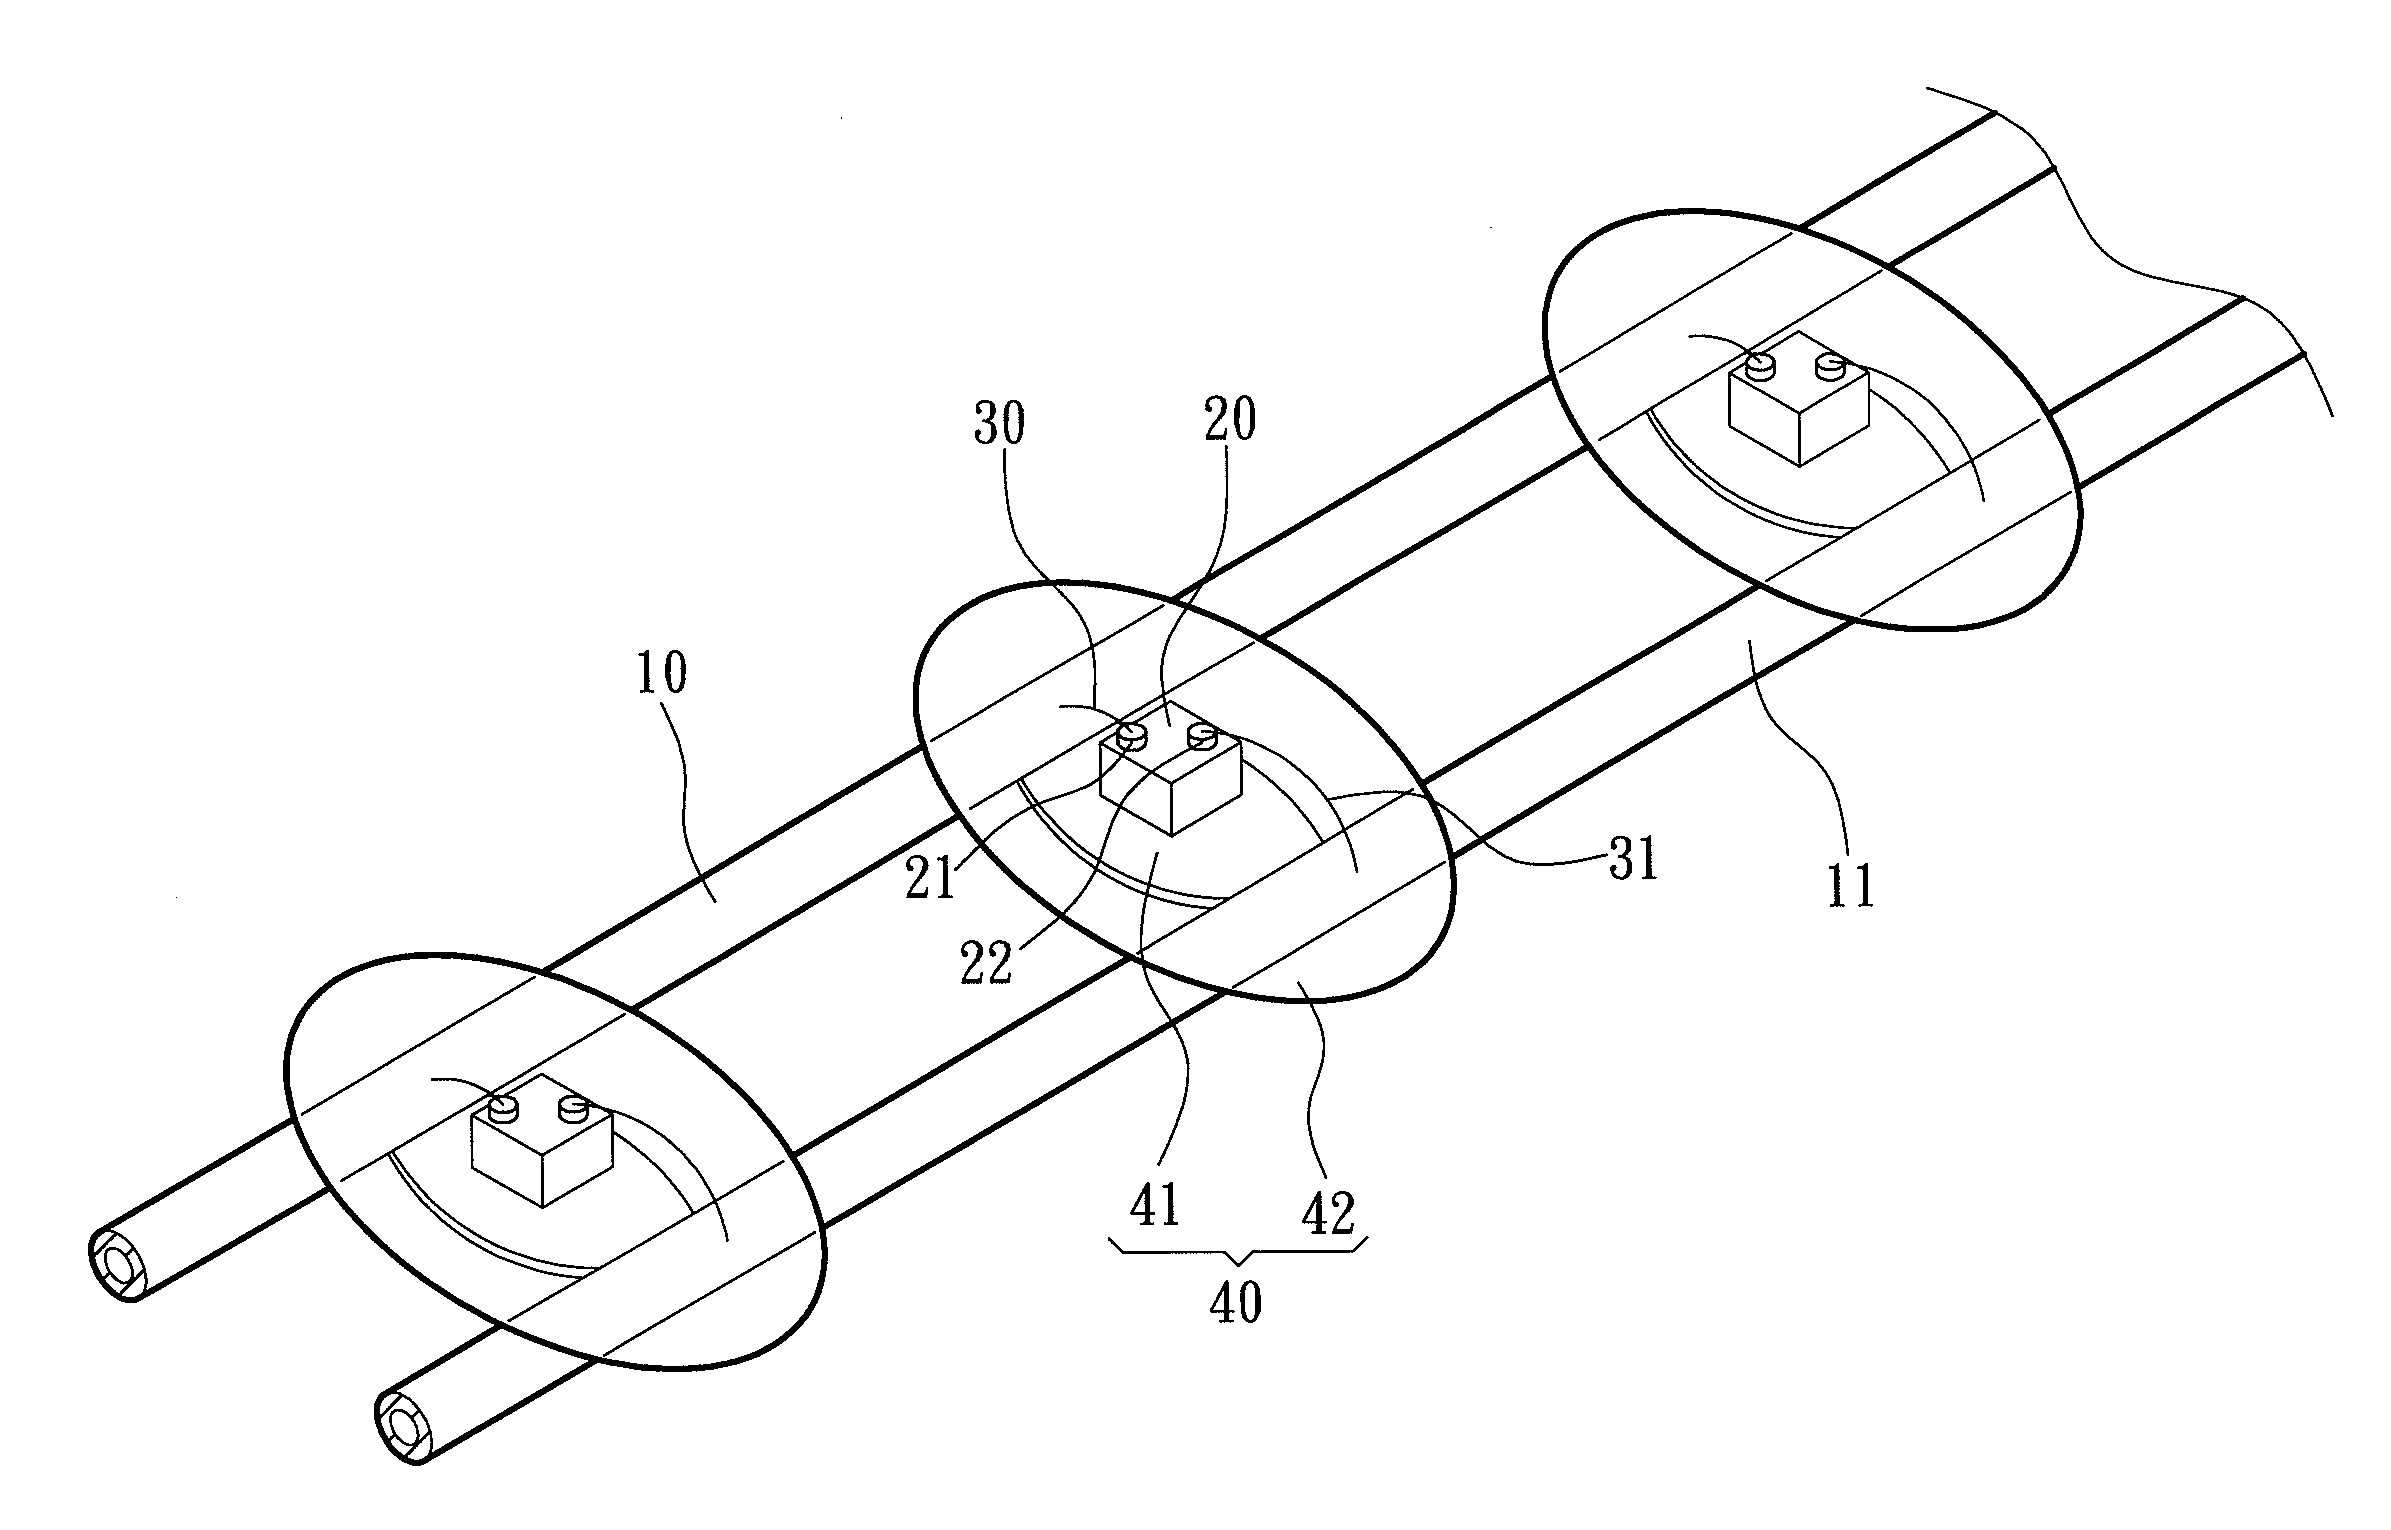 Lamp string structure for emitting light within wide area